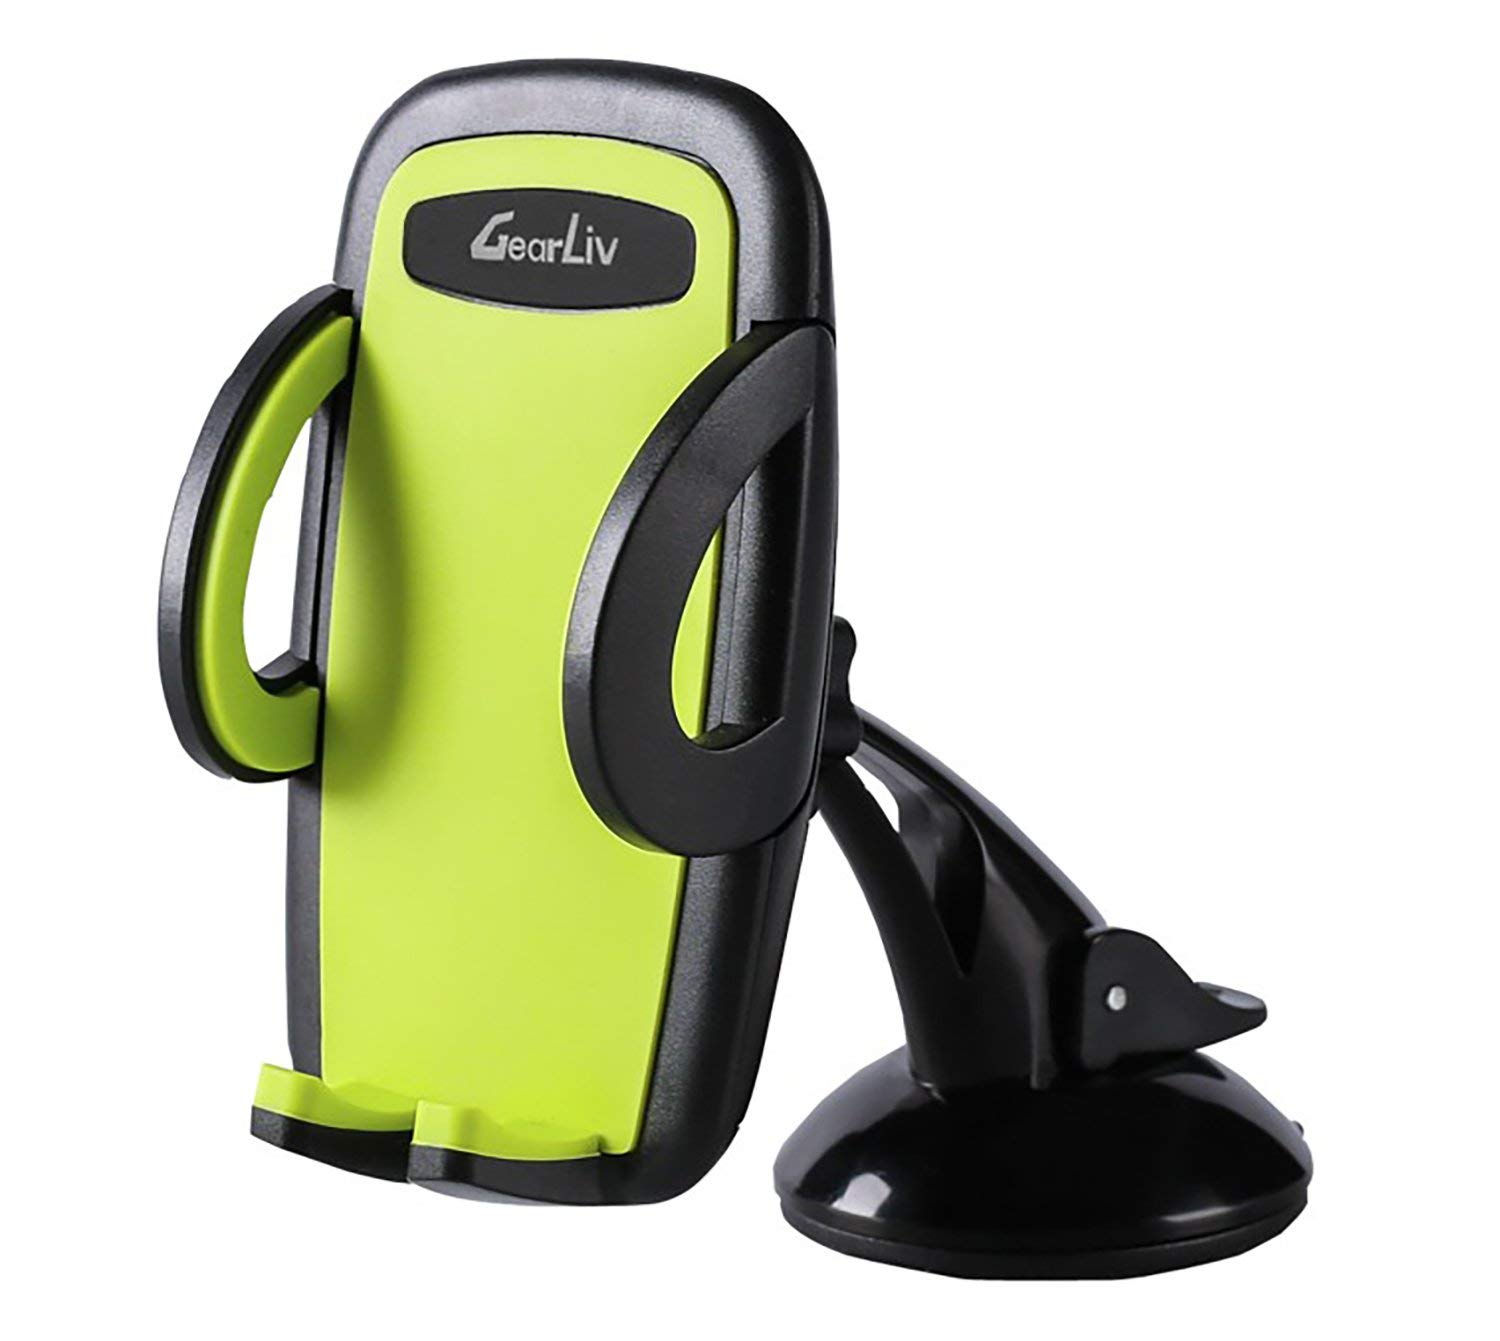 GearLiv dashboard car phone mount for $5.39 with code